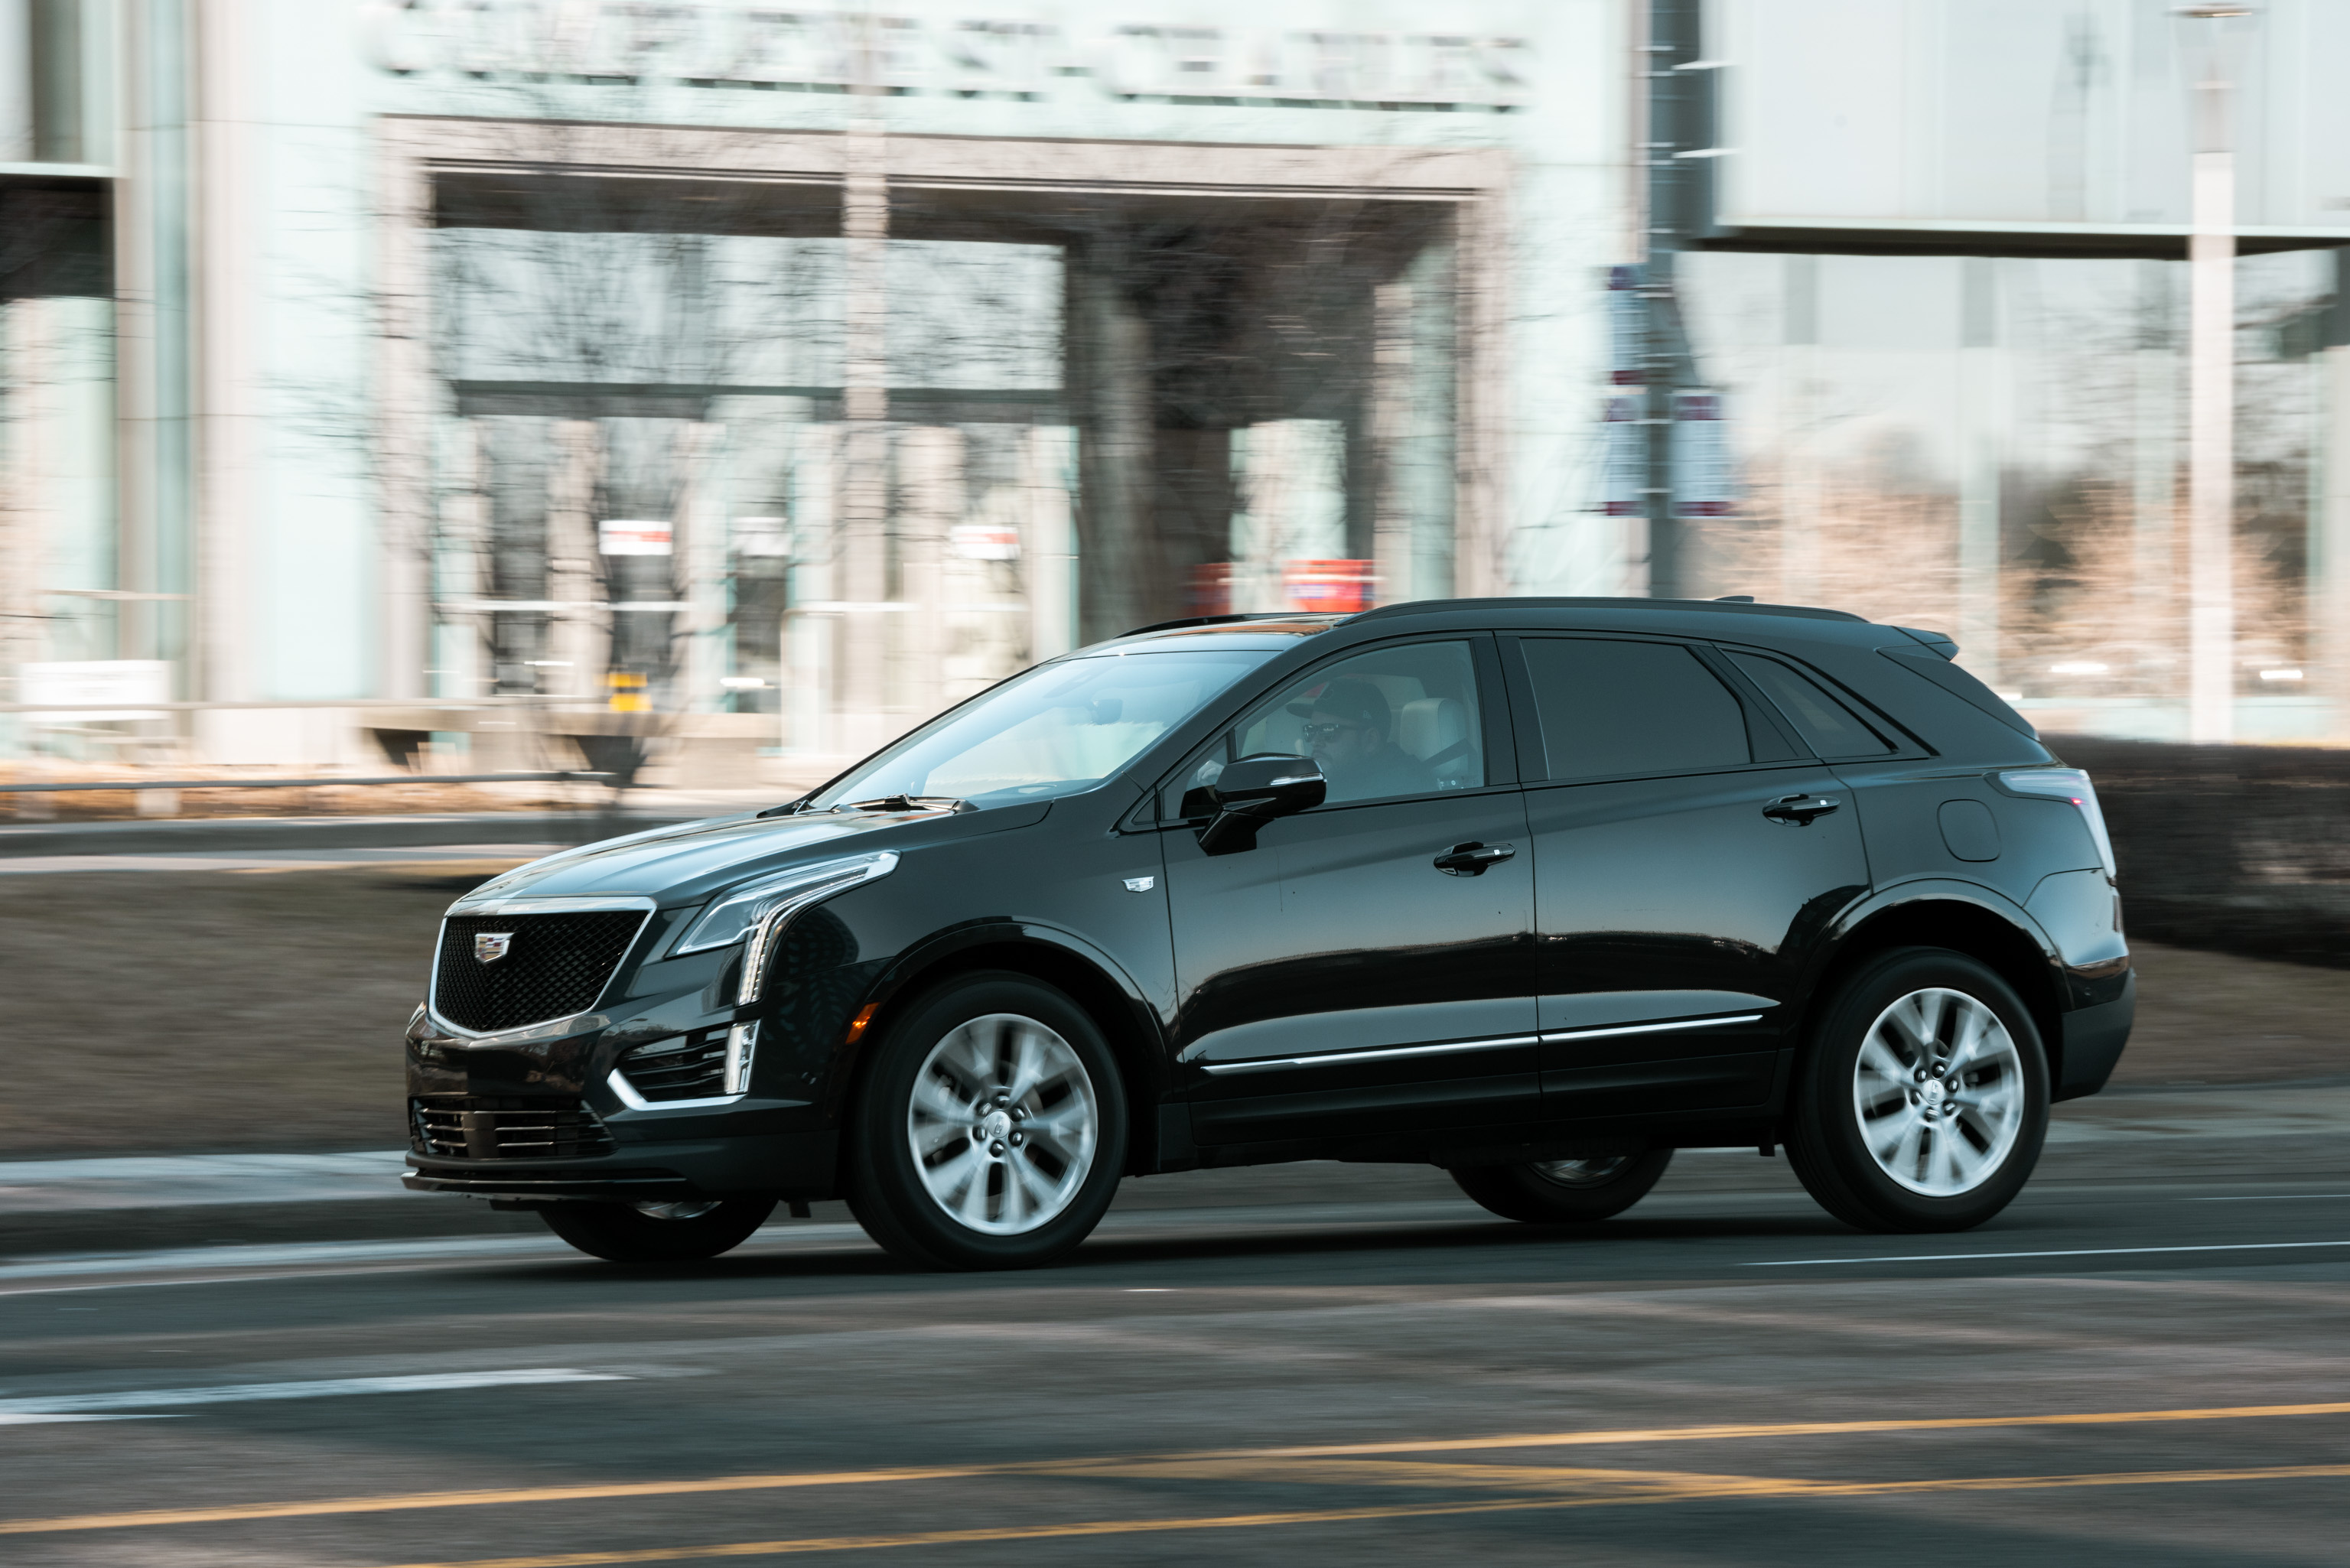 Cadillac XT5, Competitiveness, Missing feature, Car enthusiasts, 3080x2050 HD Desktop